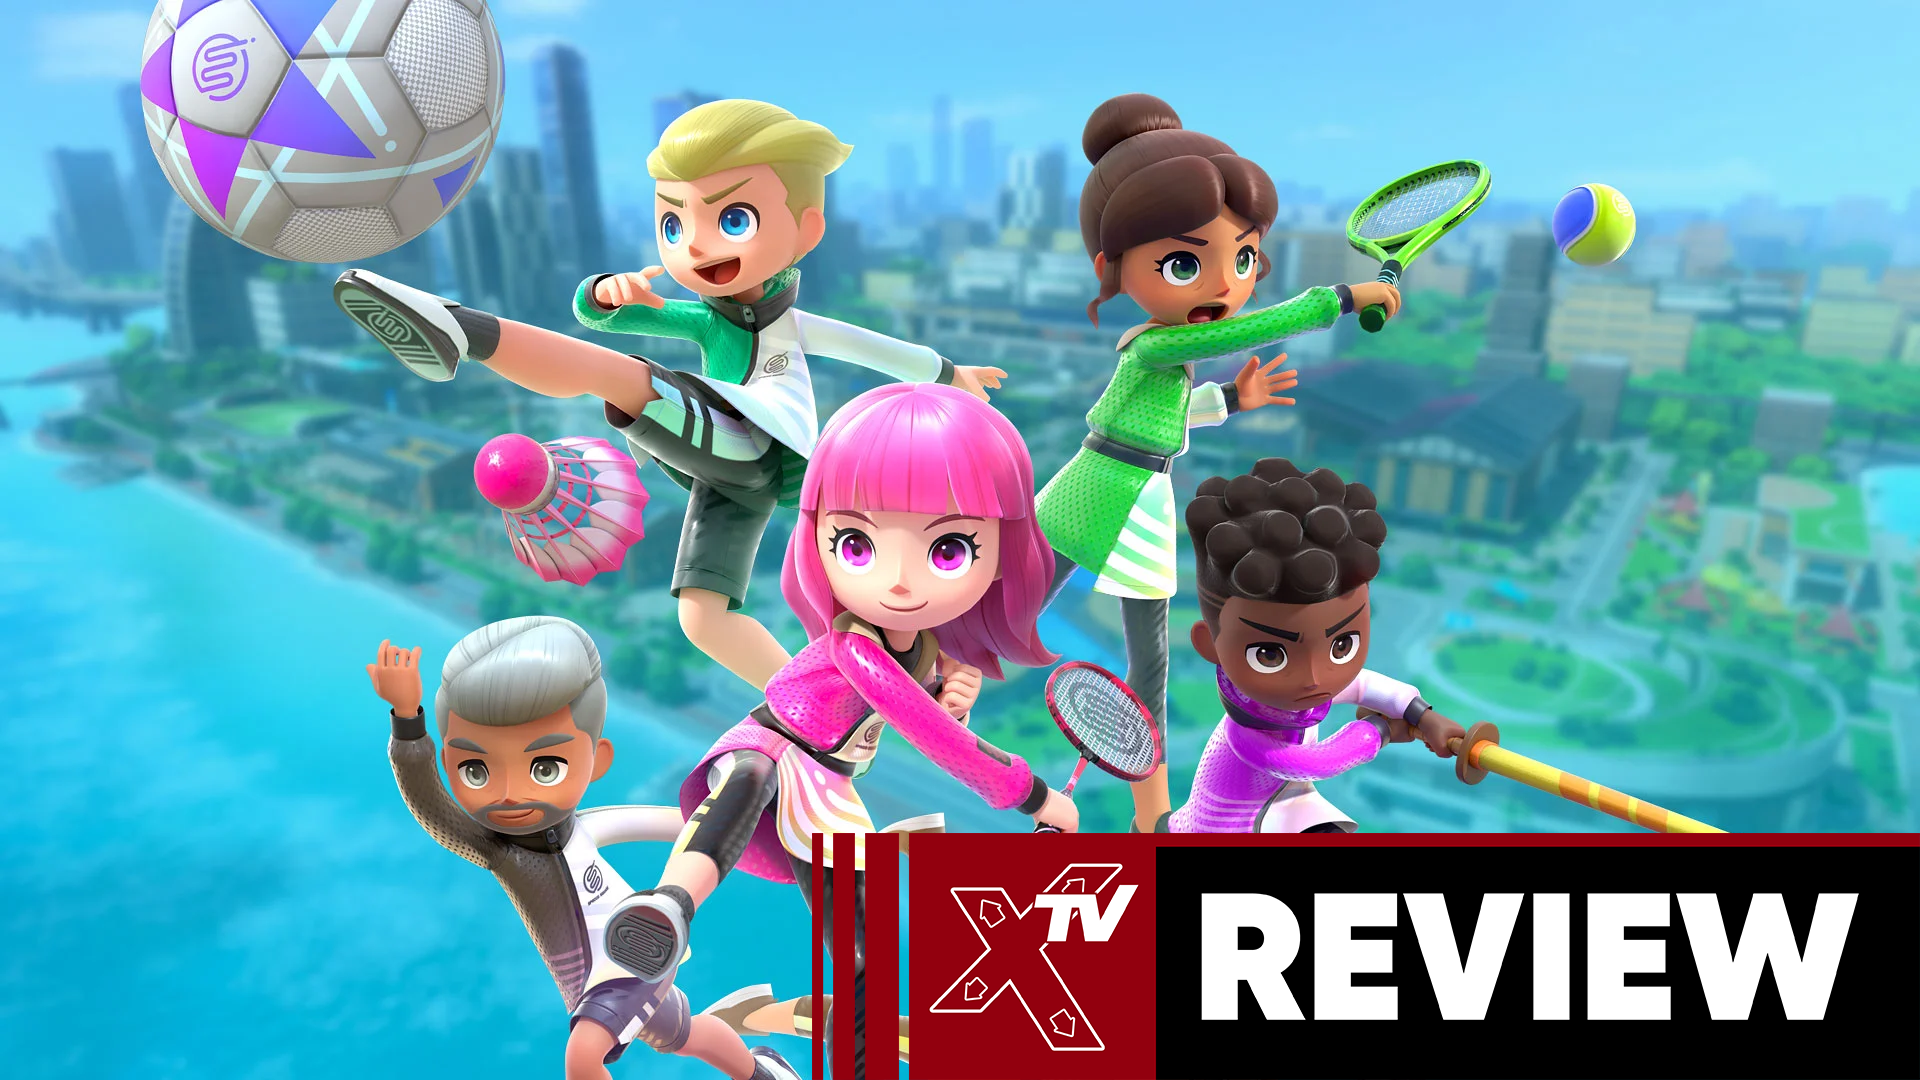 Nintendo Switch Sports review